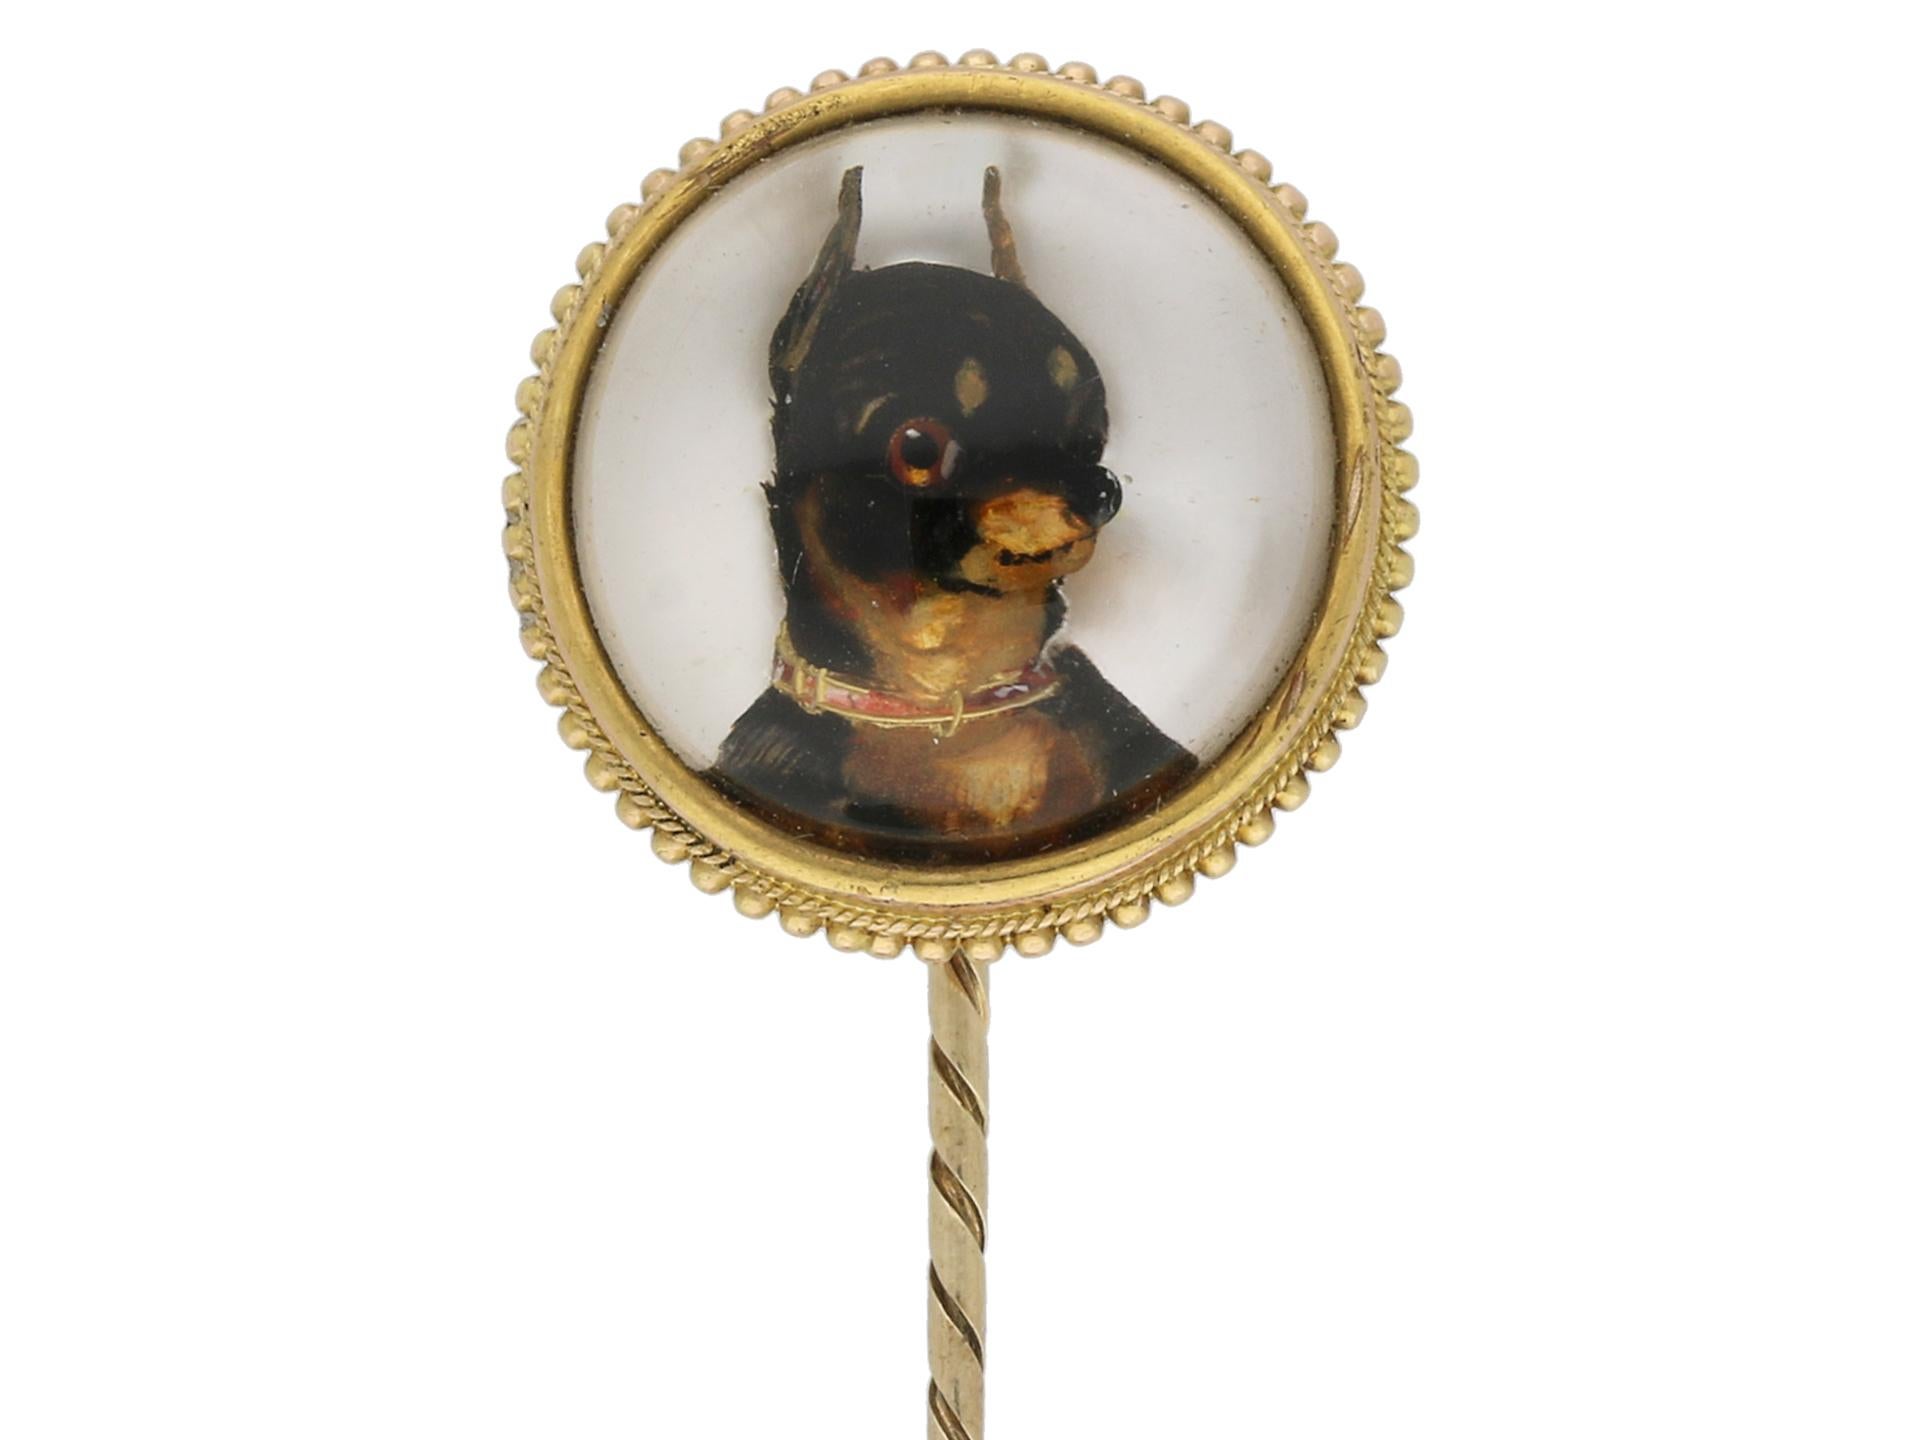 Essex crystal chihuahua pin. A yellow gold pin, set with a hand painted and carved Essex crystal depicting a chihuahua, surrounded by a fine cannetille work gold border, the reverse in mother of pearl back, all on a secure pin with decorative spiral